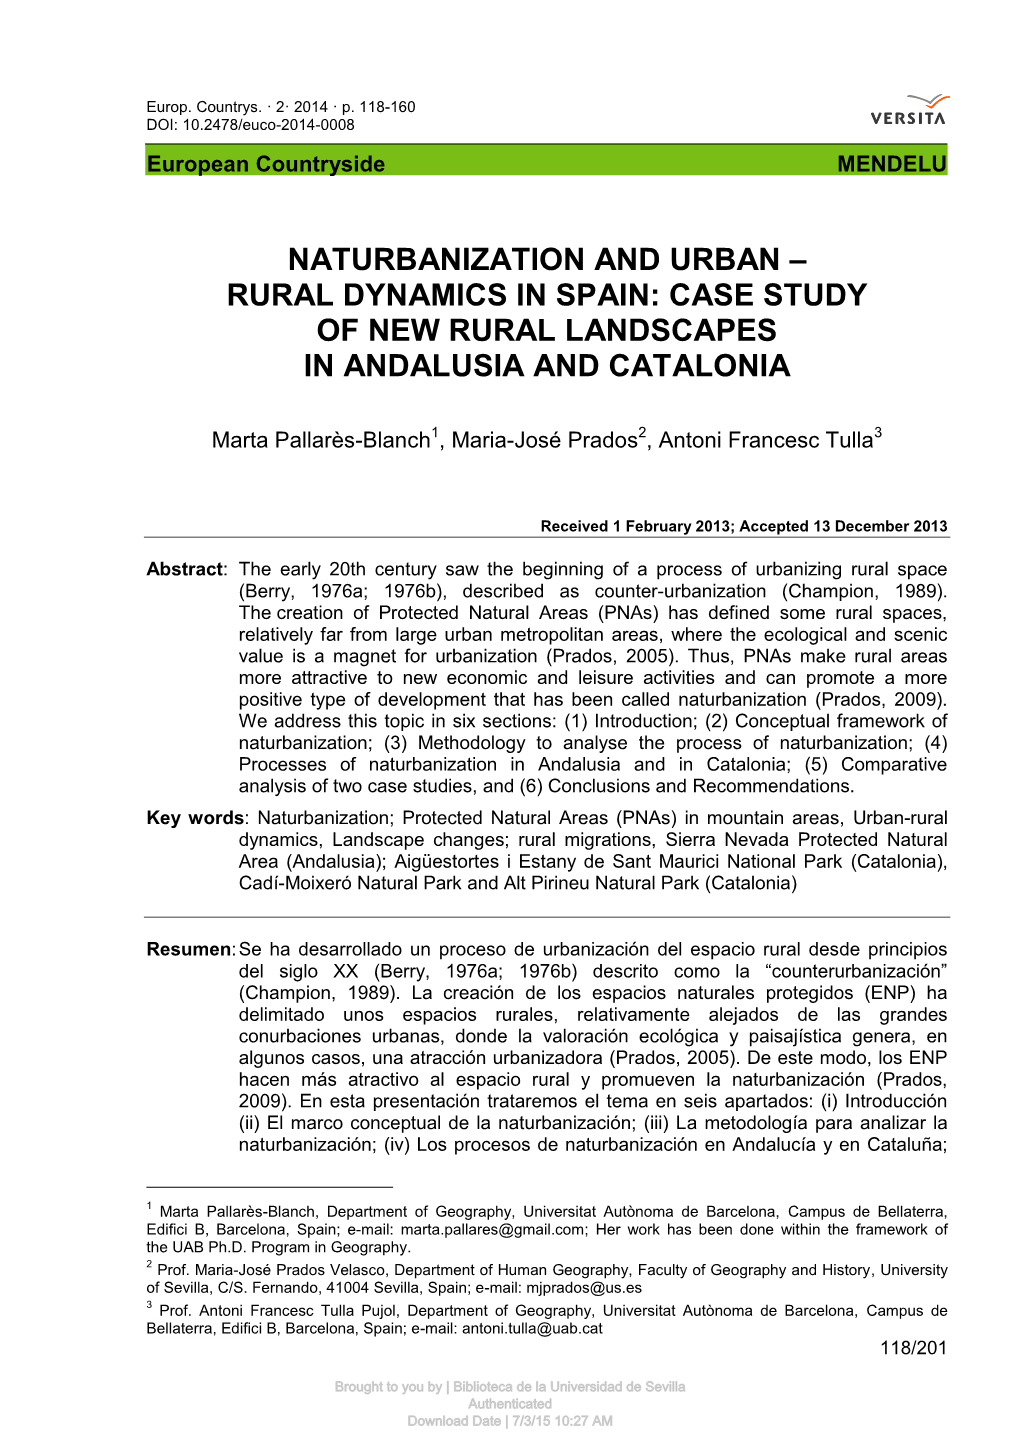 Rural Dynamics in Spain: Case Study of New Rural Landscapes in Andalusia and Catalonia